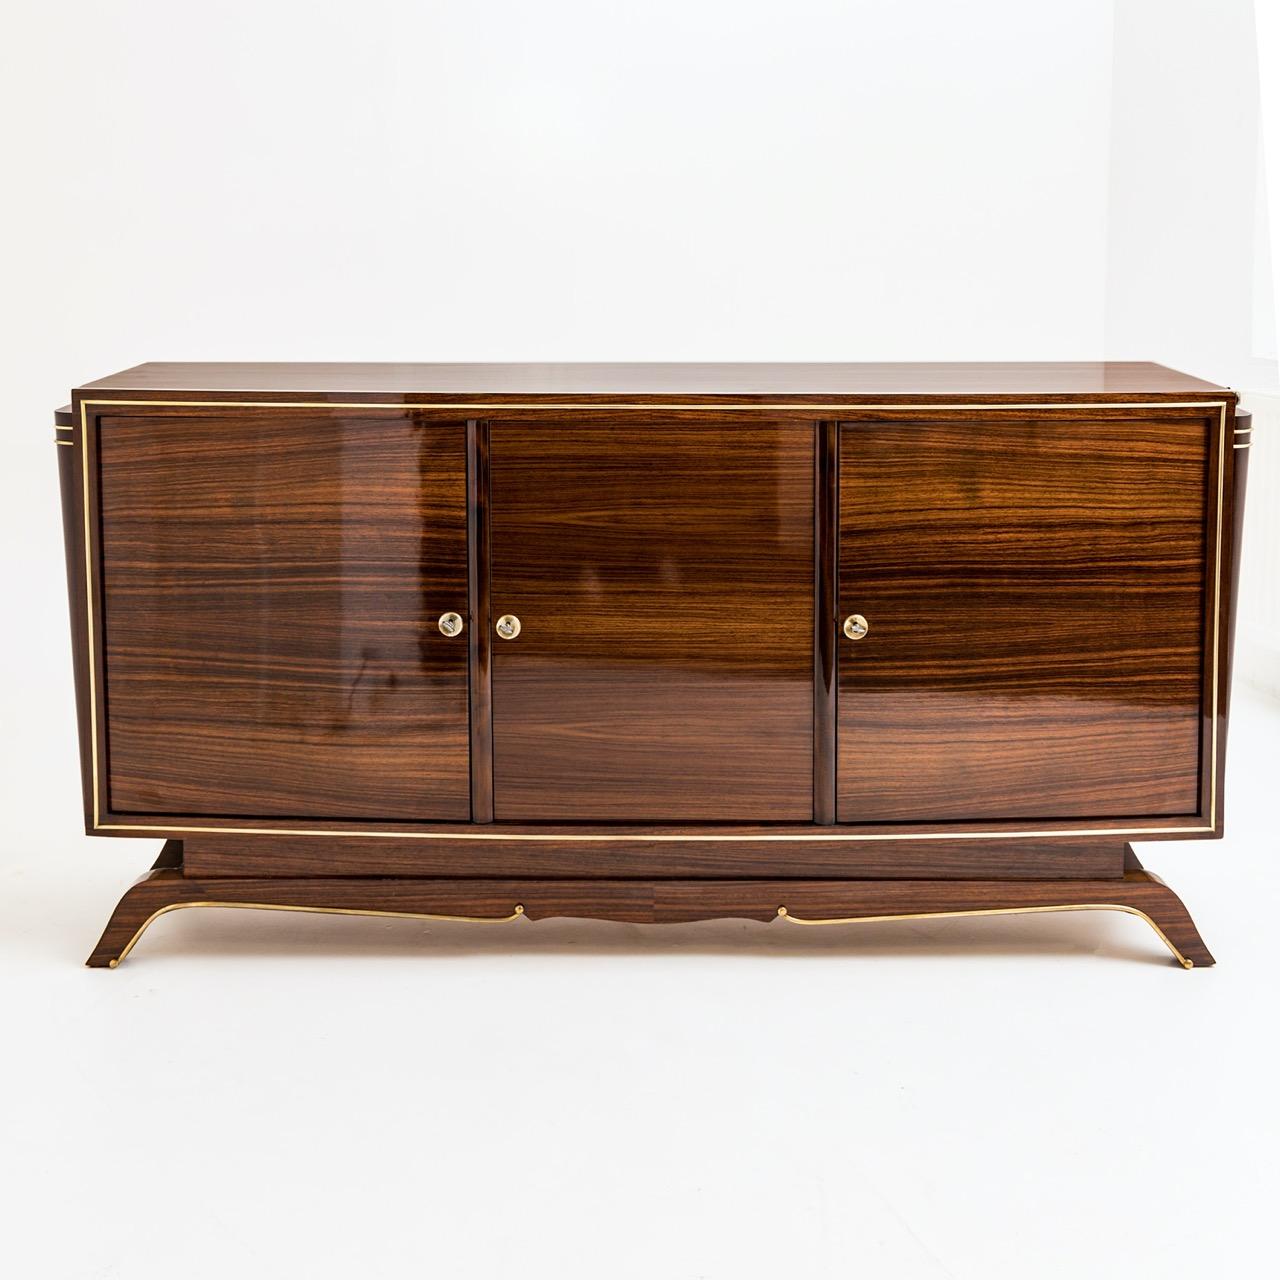 Elegant French Art Deco brass enfilade/sideboard composed of three doors in a dark rosewood veneer and adorned with applied brass trim with lemon wood interior
Date: 1930’s
Origin: France
Condition: Excellent repolished condition
Dimensions: 37”